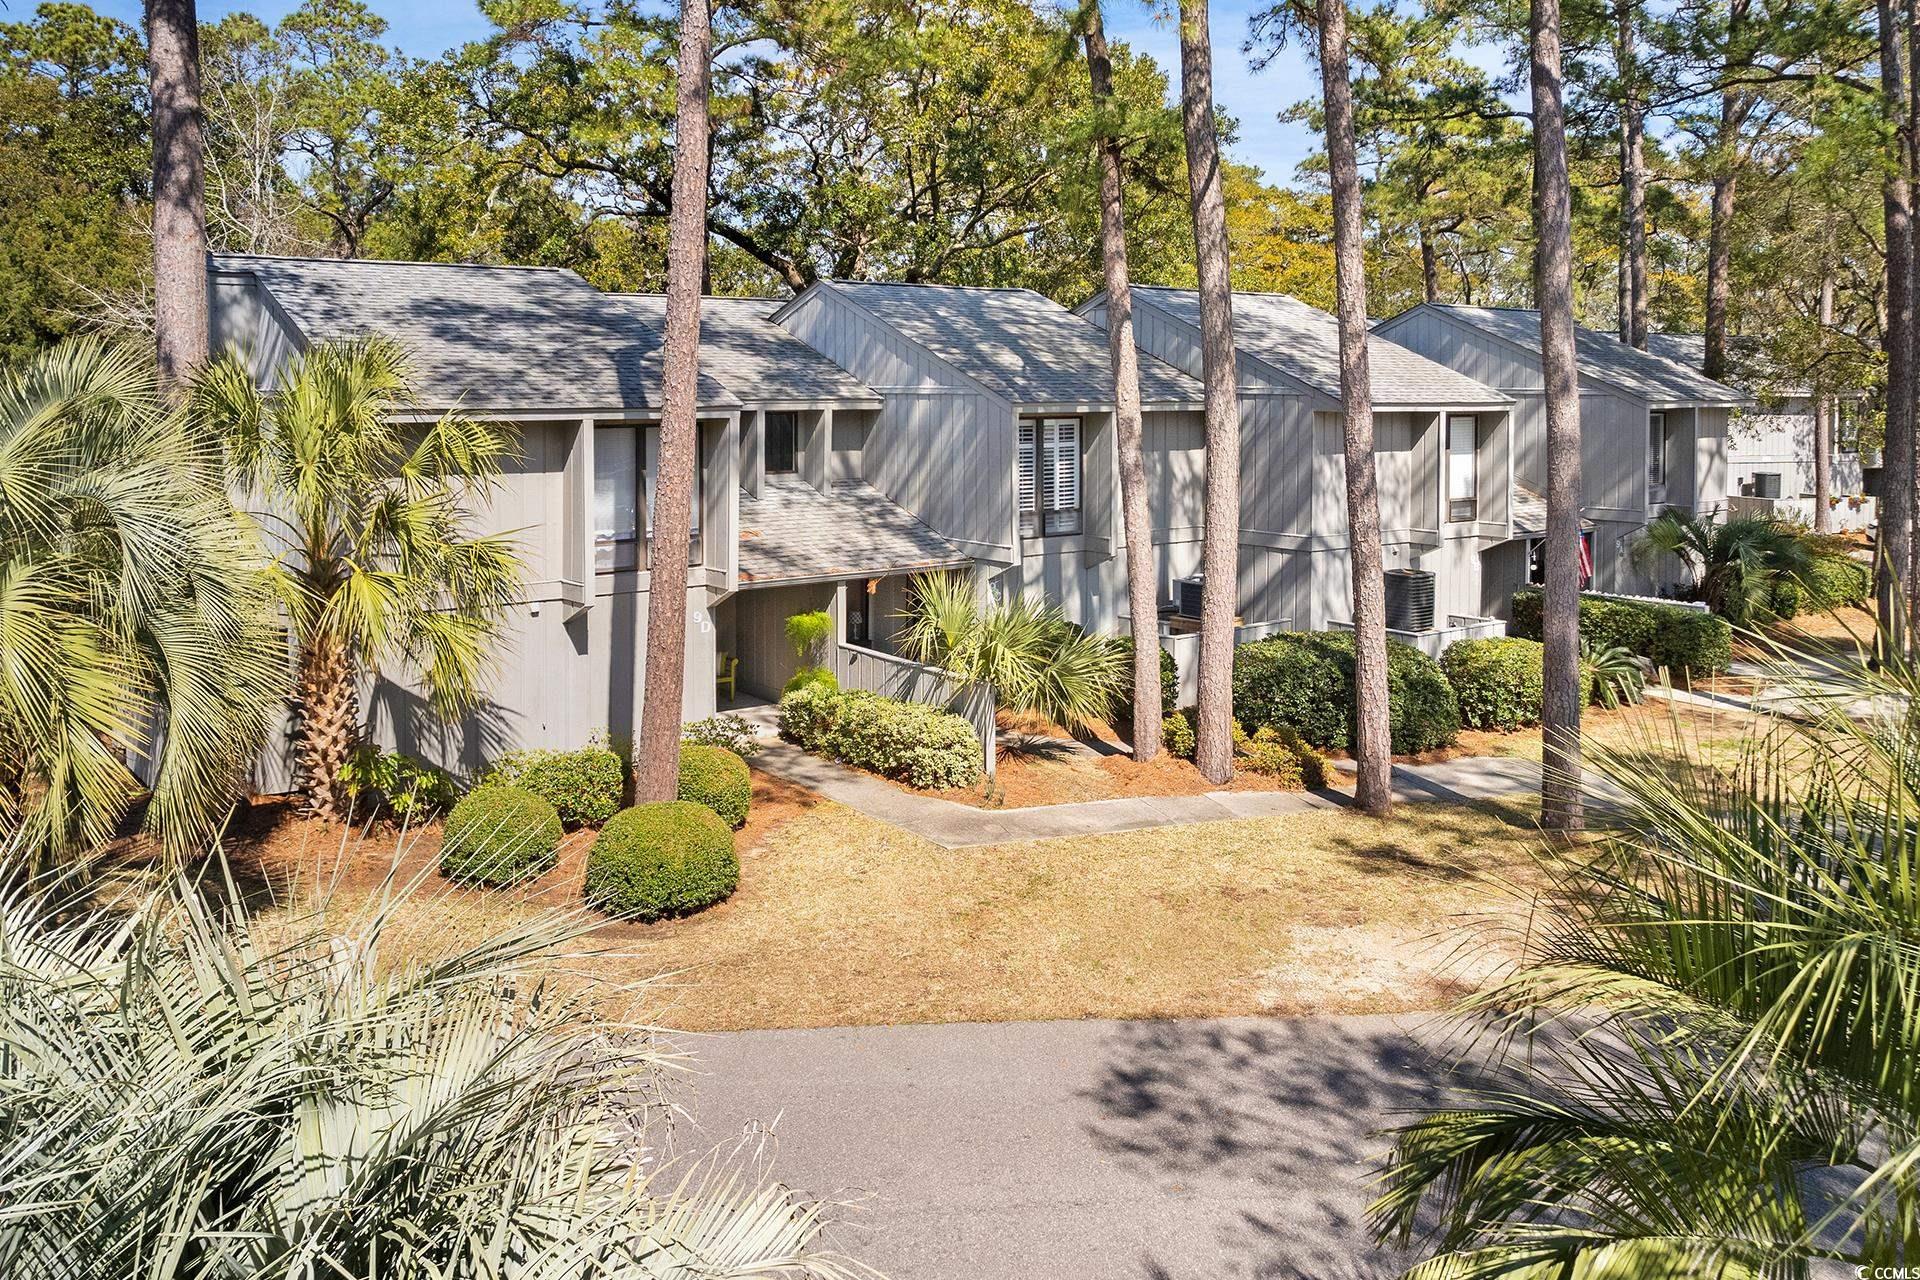 his charming end unit has been updated and boasts a delightful appeal, situated within the inviting community of salt marsh cove in pawleys island. nestled in the heart of pawleys island, this unit offers access to a host of amenities including a community pool, clubhouse, creek dock, and boat storage. enjoy the convenience of being just moments away from pristine beaches, renowned golf courses, quaint boutiques, and enticing dining options. featuring three bedrooms, this unit showcases a brand-new kitchen and two bathrooms upstairs, leaving the downstairs perfect for entertaining guests. a spacious laundry room adds functionality, enhanced by eye-catching wallpaper that imbues the unit with its own unique character. outdoor living is embraced with tiled front and back porches, providing ample space for relaxation. abundant storage ensures ample room for all your belongings. welcome to your new home in the charming town of pawleys island, sc.